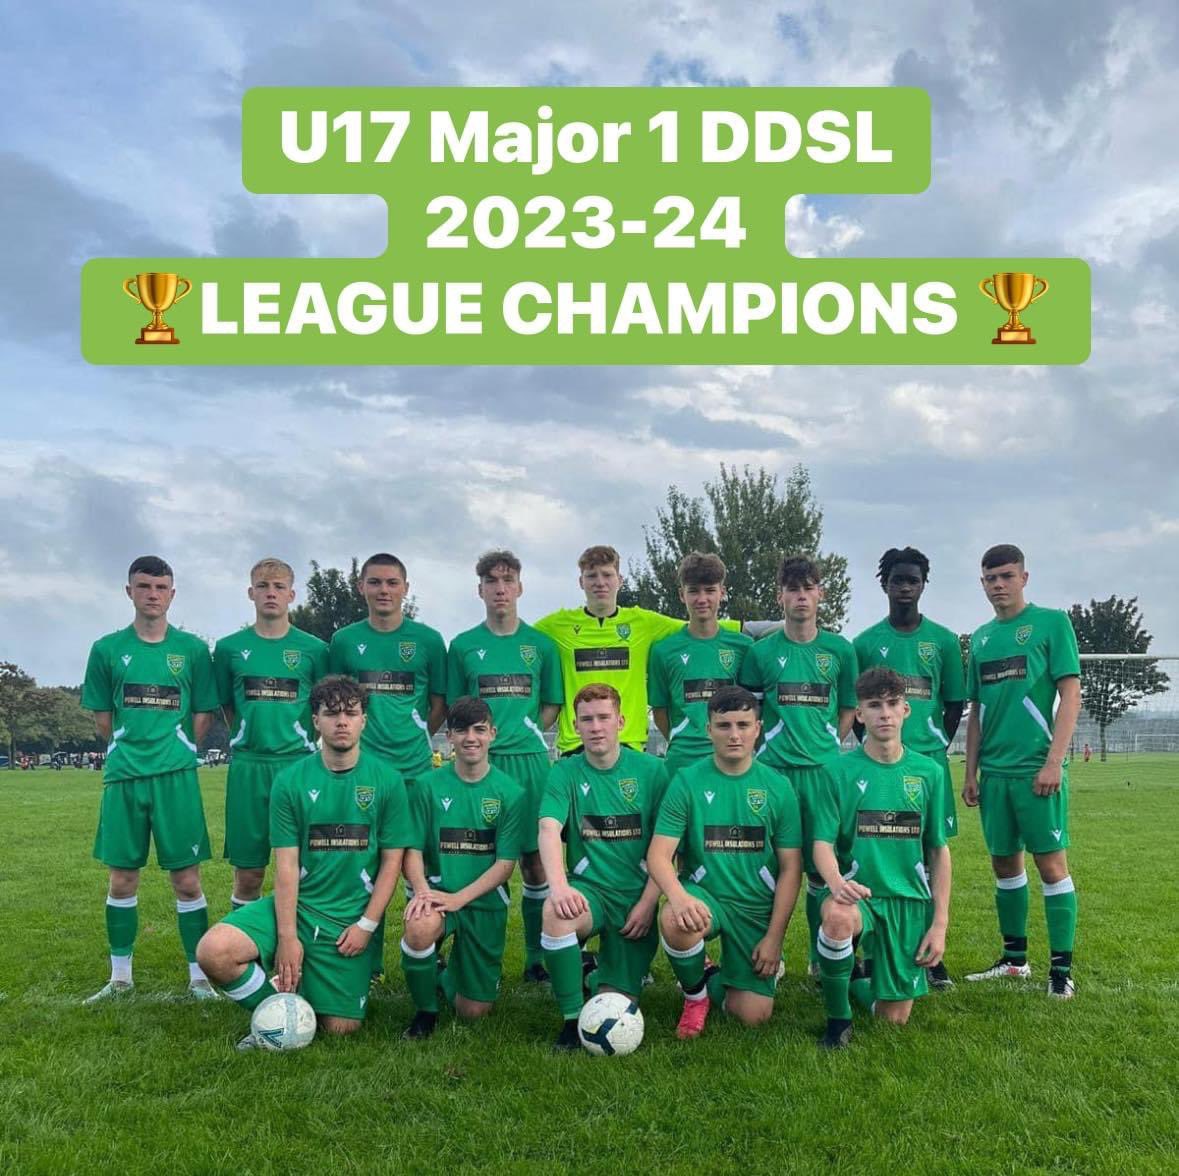 We are delighted and proud to announce that our U17s are officially the DDSL Major 1 2023-24 league winners. The team will play the DDSL Cup Final tomorrow, FRIDAY 24th, in the AUL, kickoff 7:15 We wish the very best of luck to our U17s on their Cup Final #bringithome